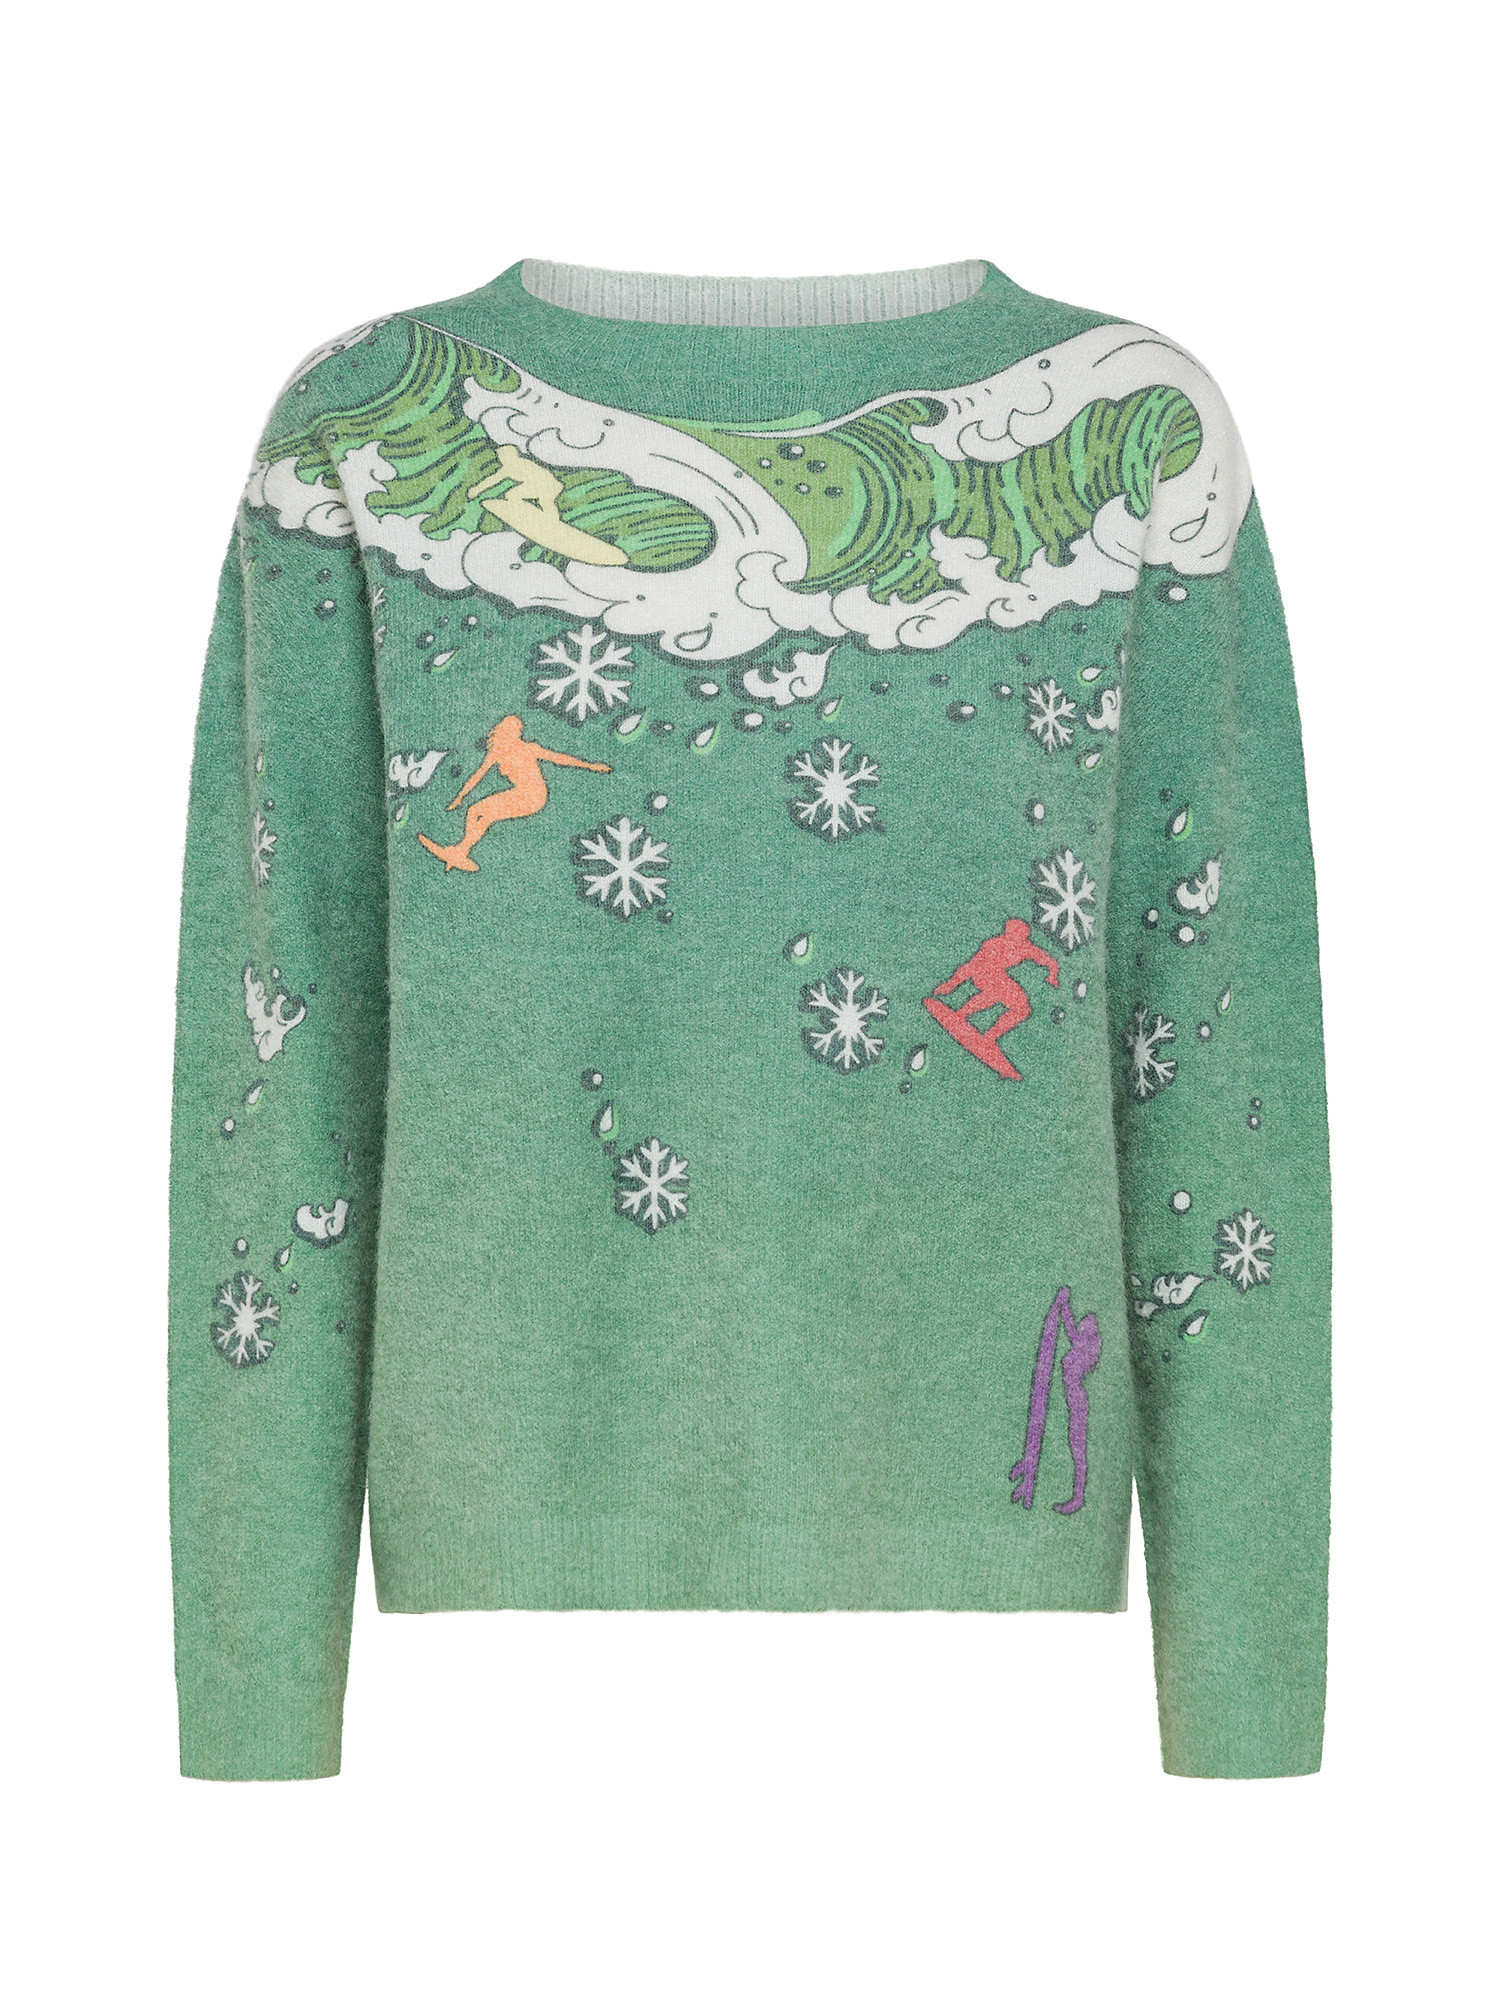 Pullover The Surfer’s Christmas by Paula Cademartori, , large image number 0